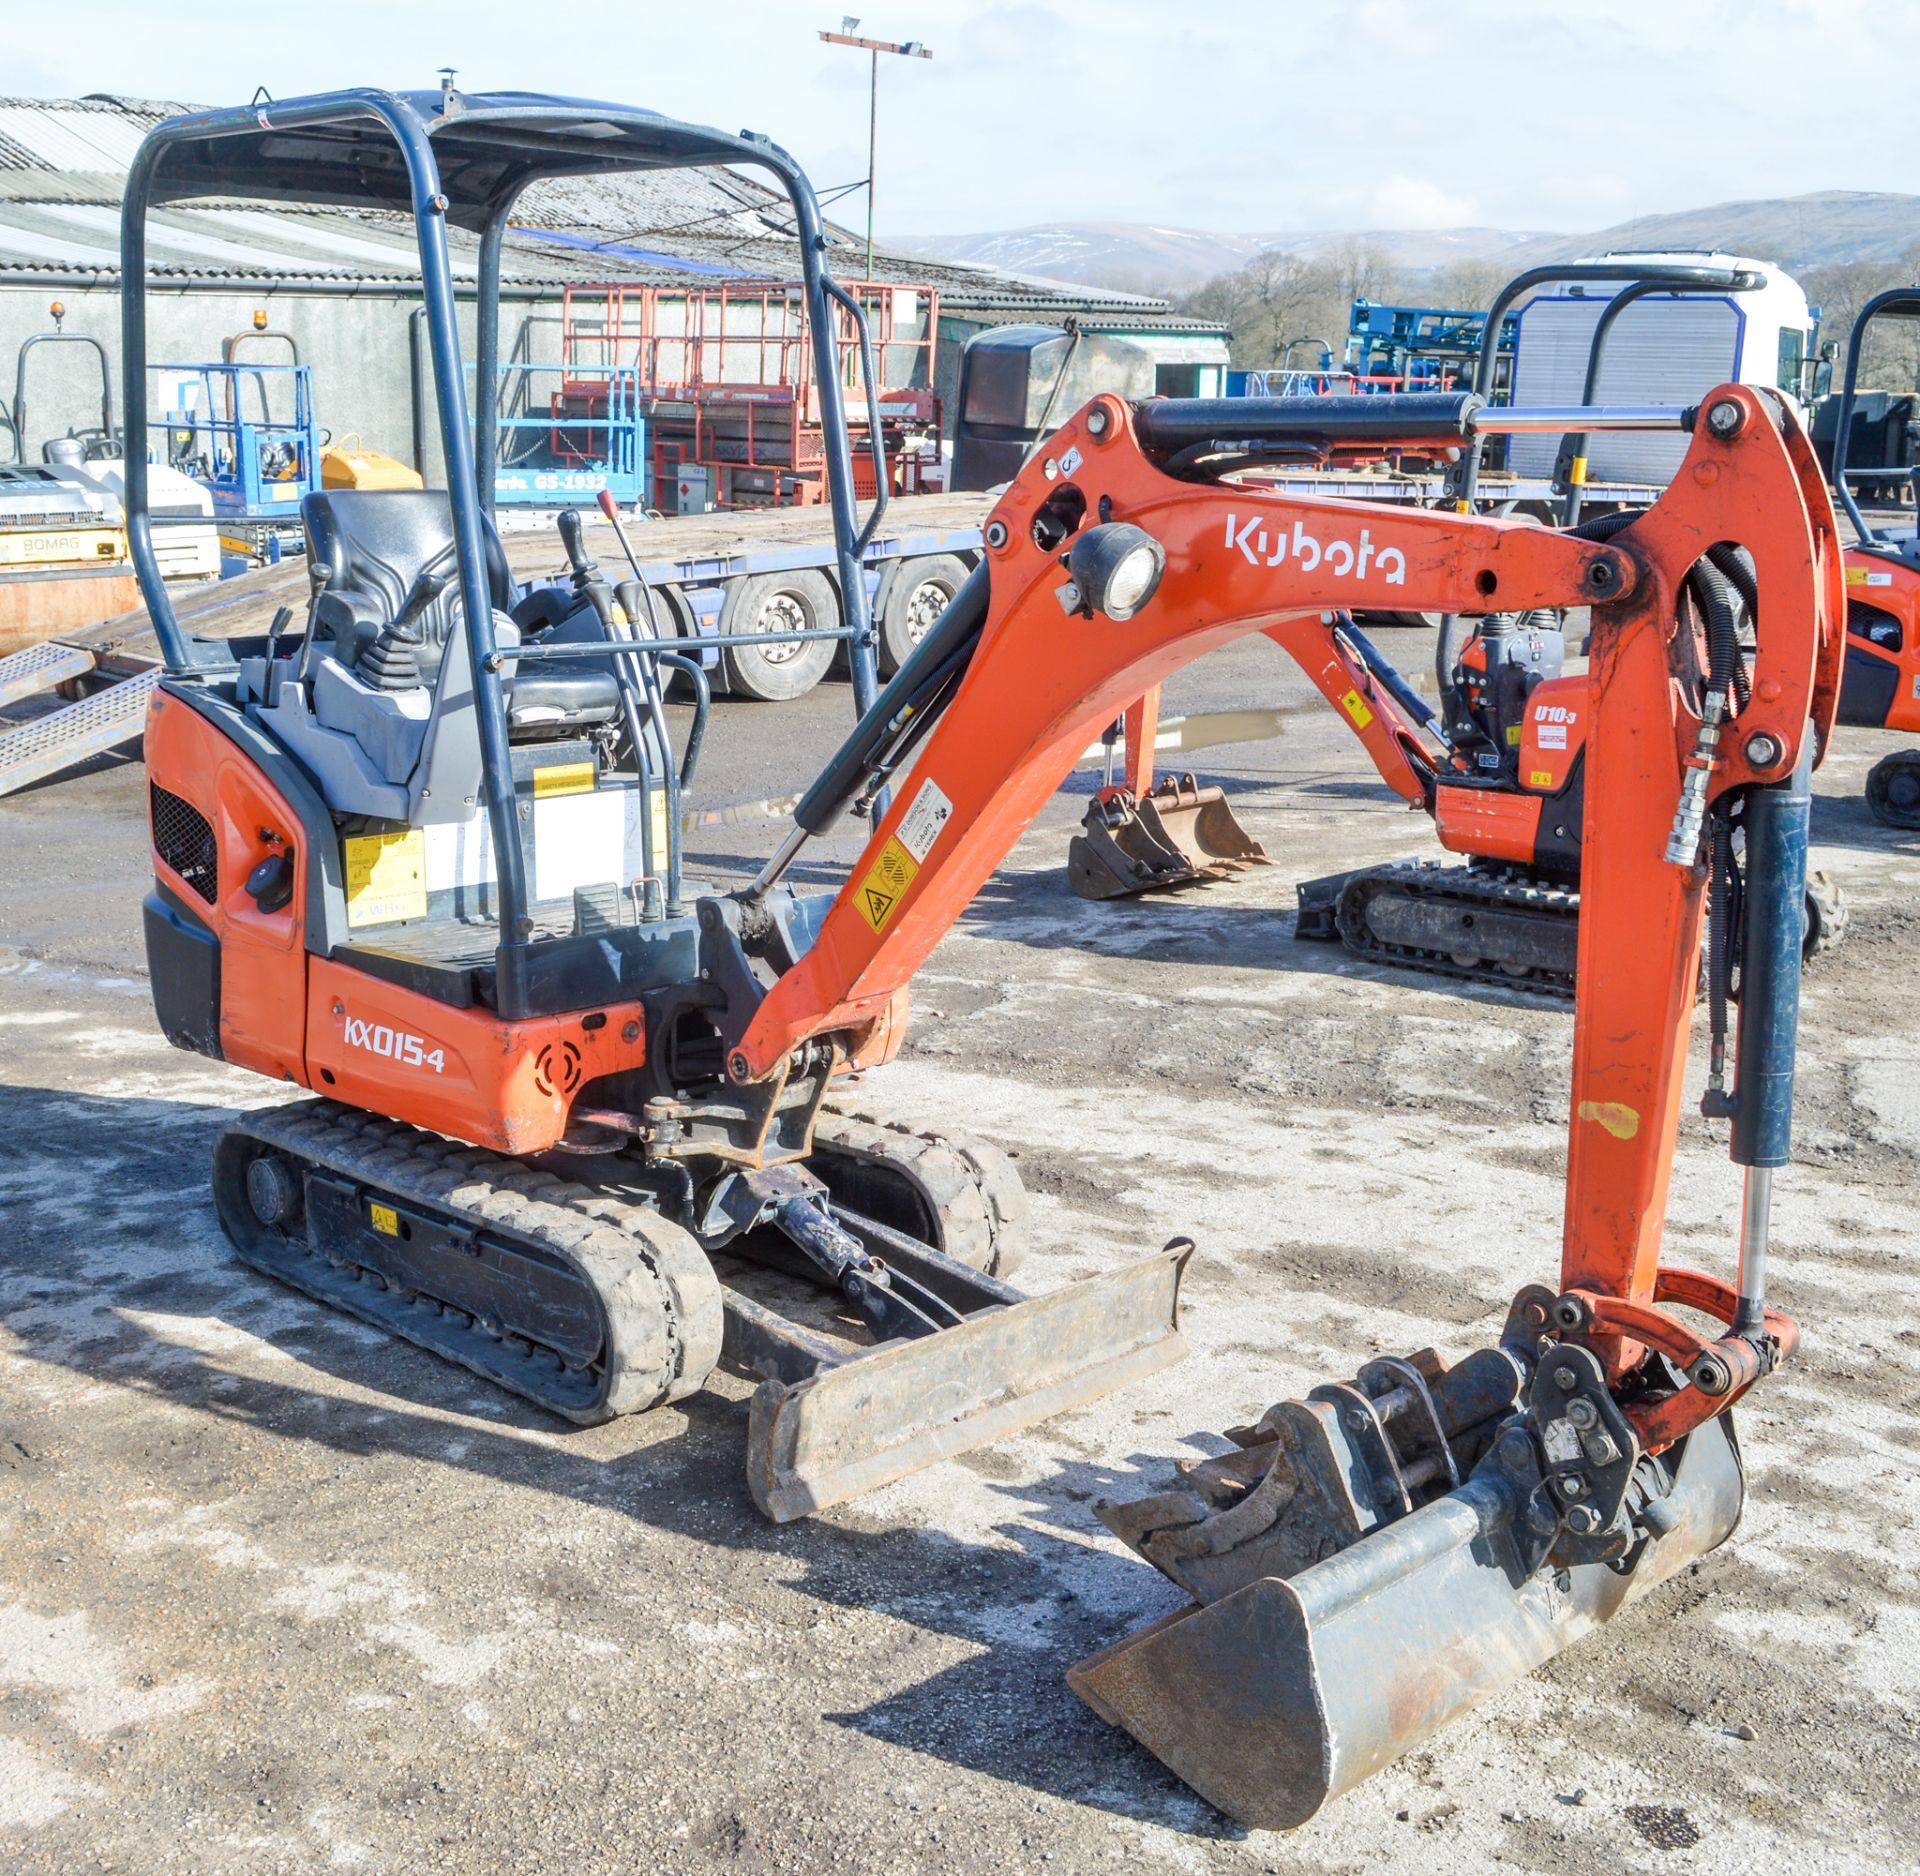 Kubota KX015.4 1.5 tonne rubber tracked excavator Year: 2015 S/N: 58748 Recorded Hours: 1056 - Image 4 of 11